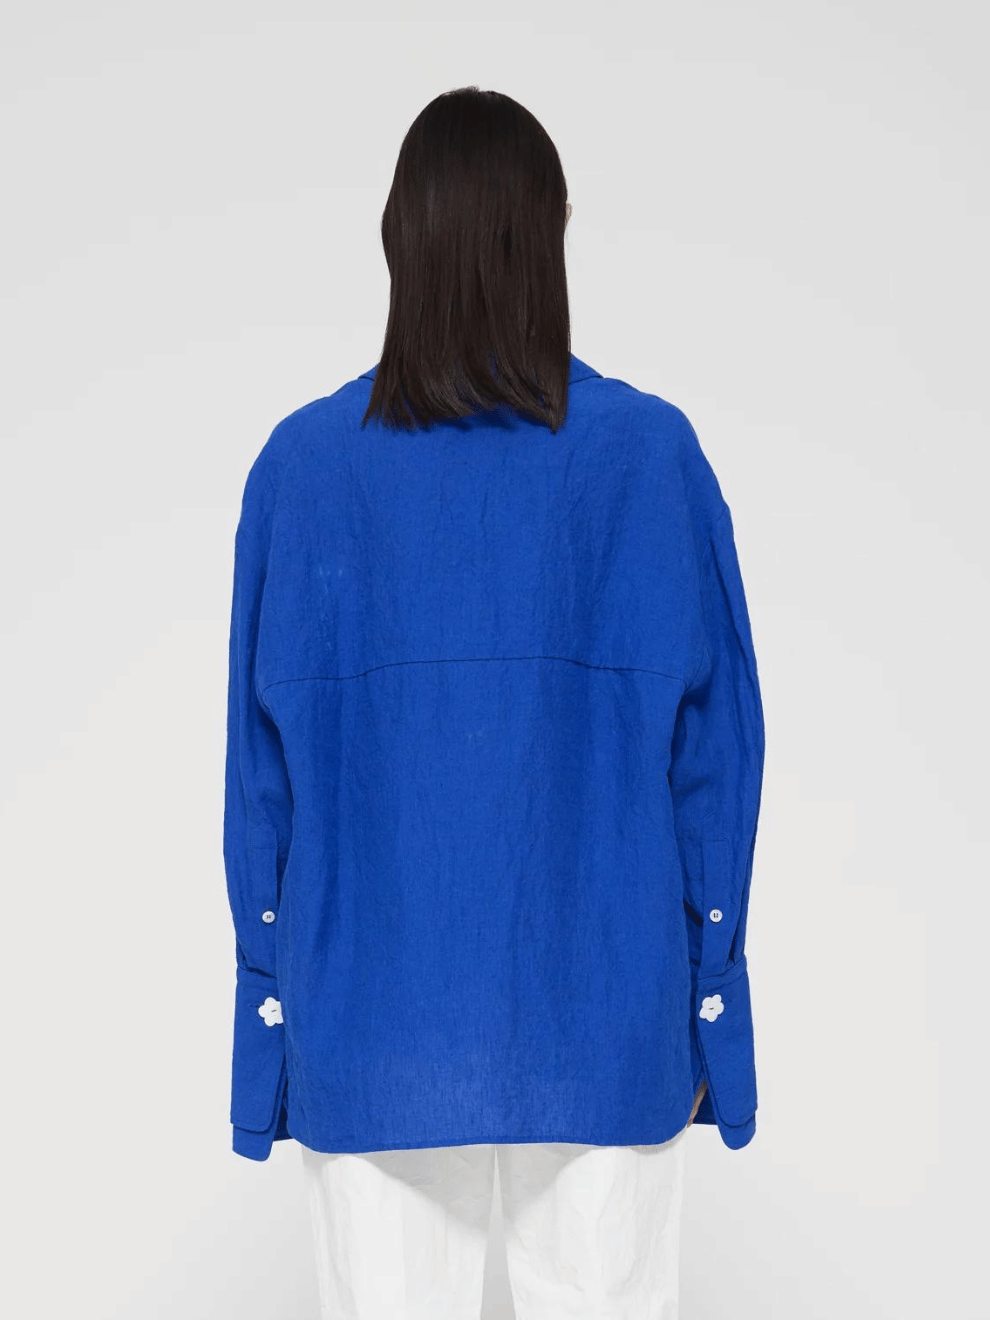 Double-Cuff Shirt in Blue